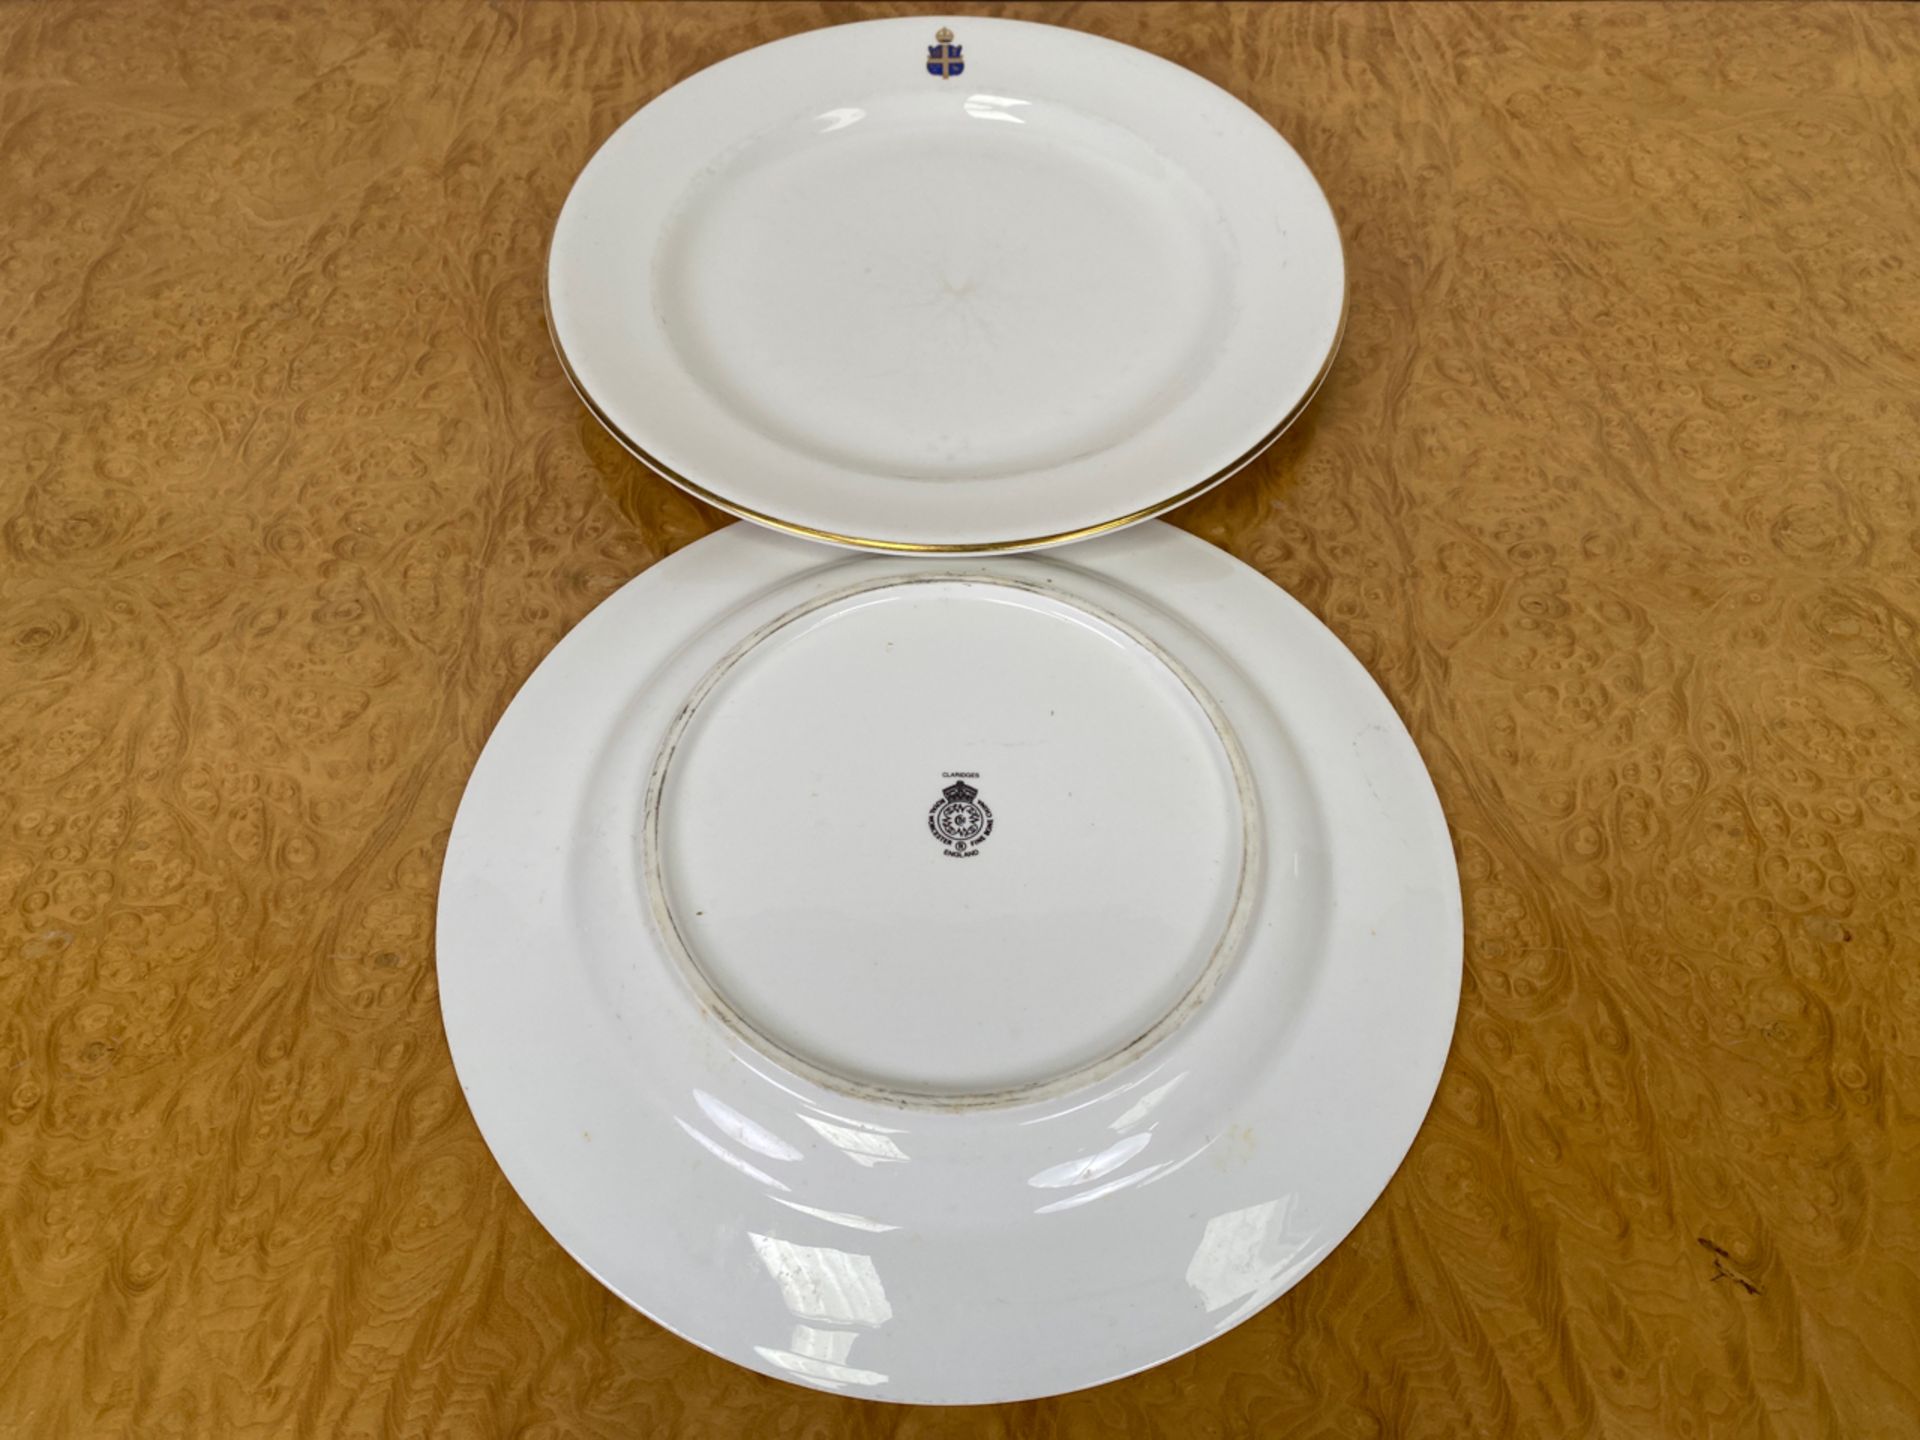 Set of Crested Crockery for Claridge's by Chommette 1884 - Image 26 of 36